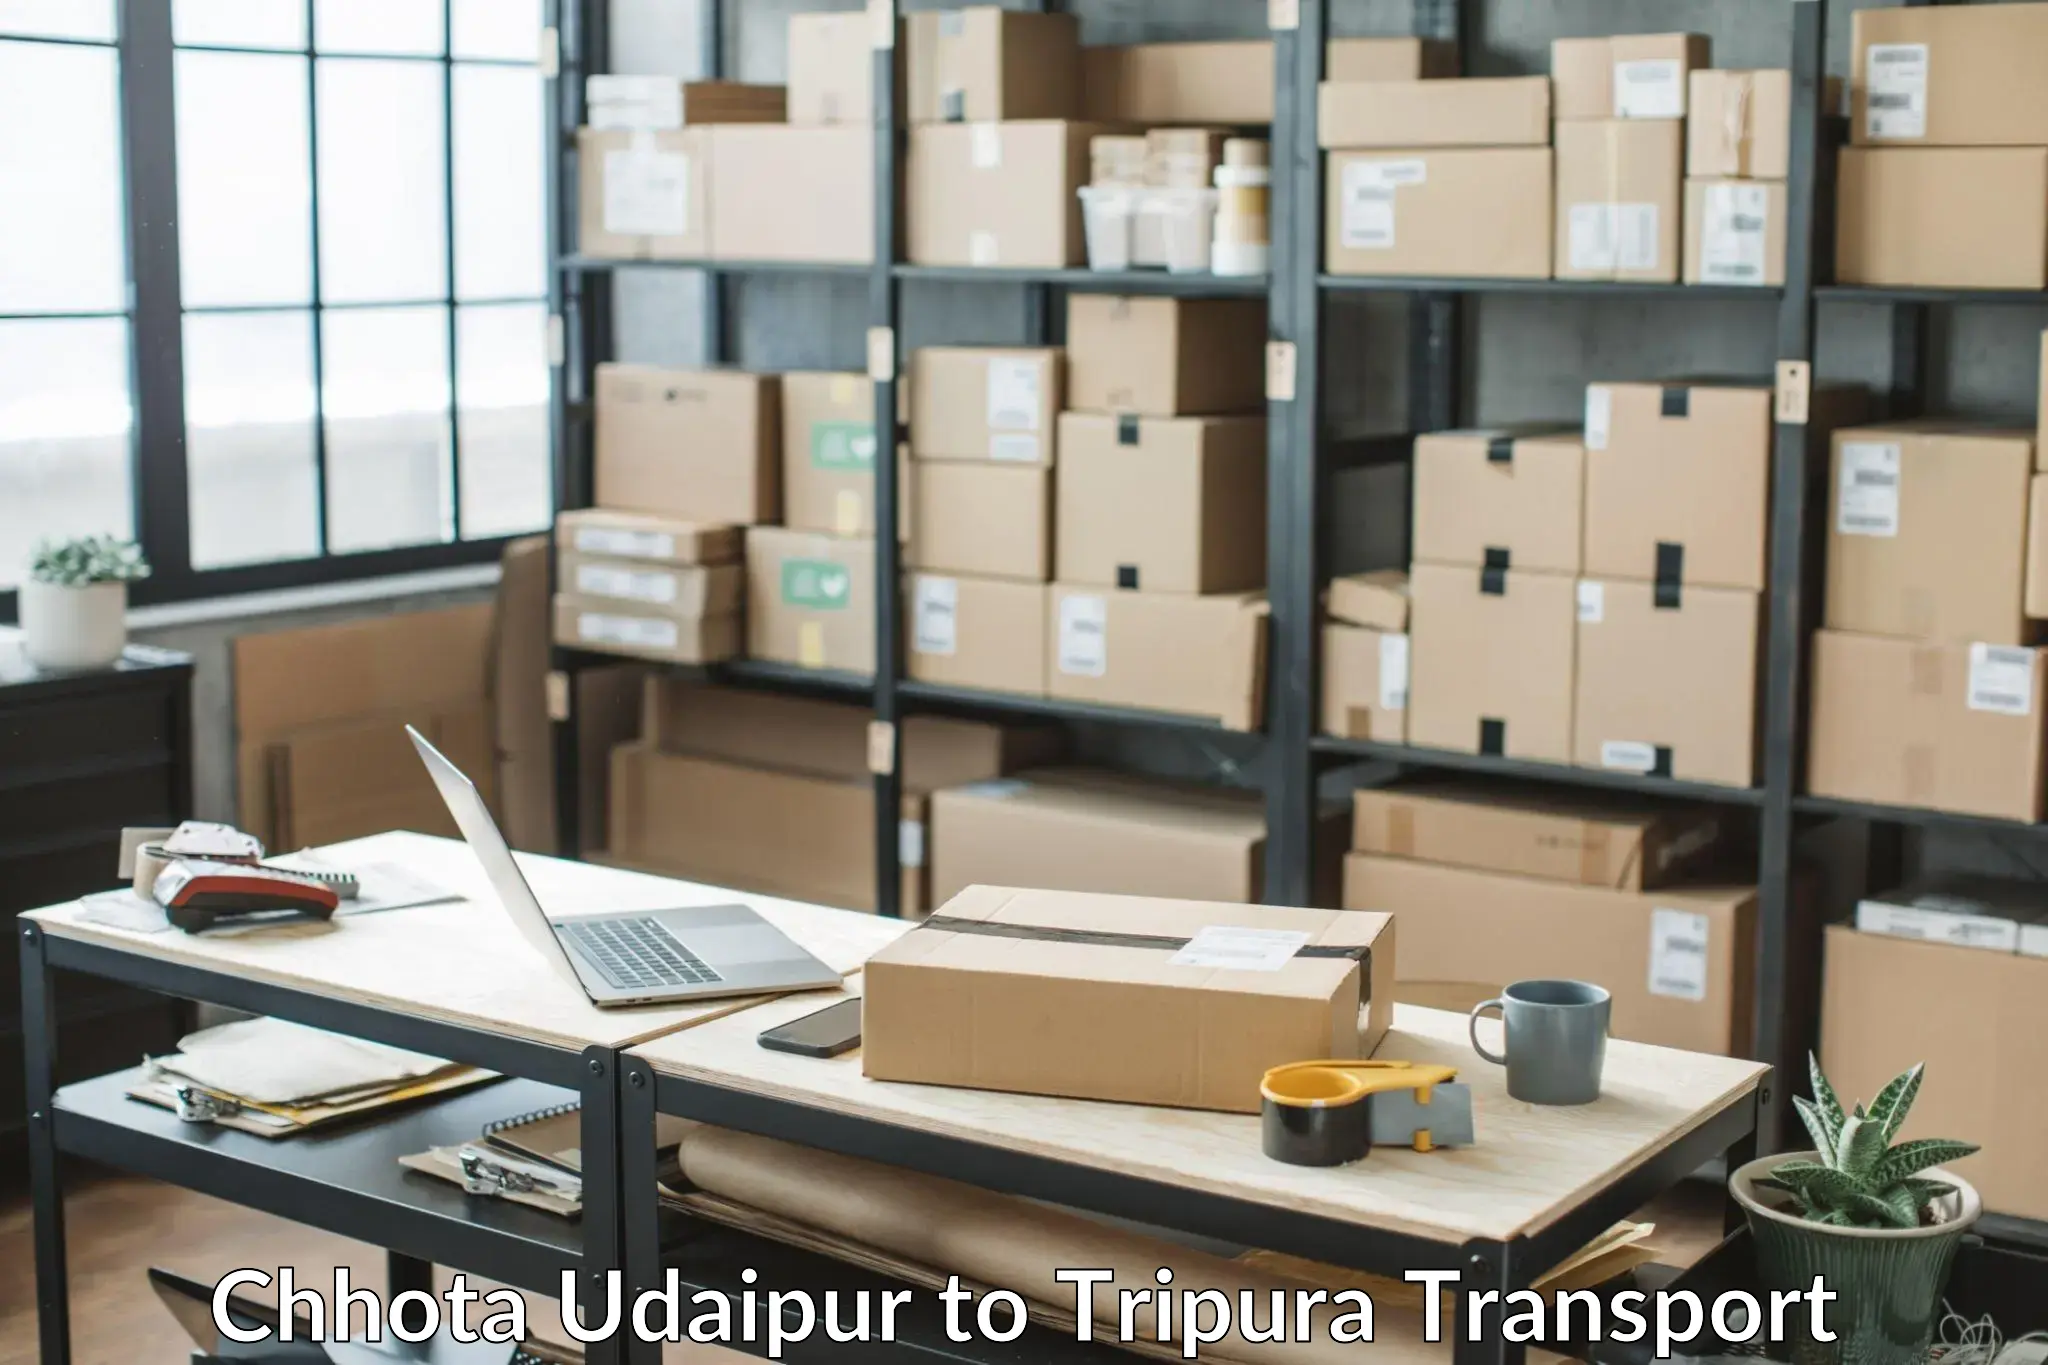 Air cargo transport services in Chhota Udaipur to Udaipur Tripura